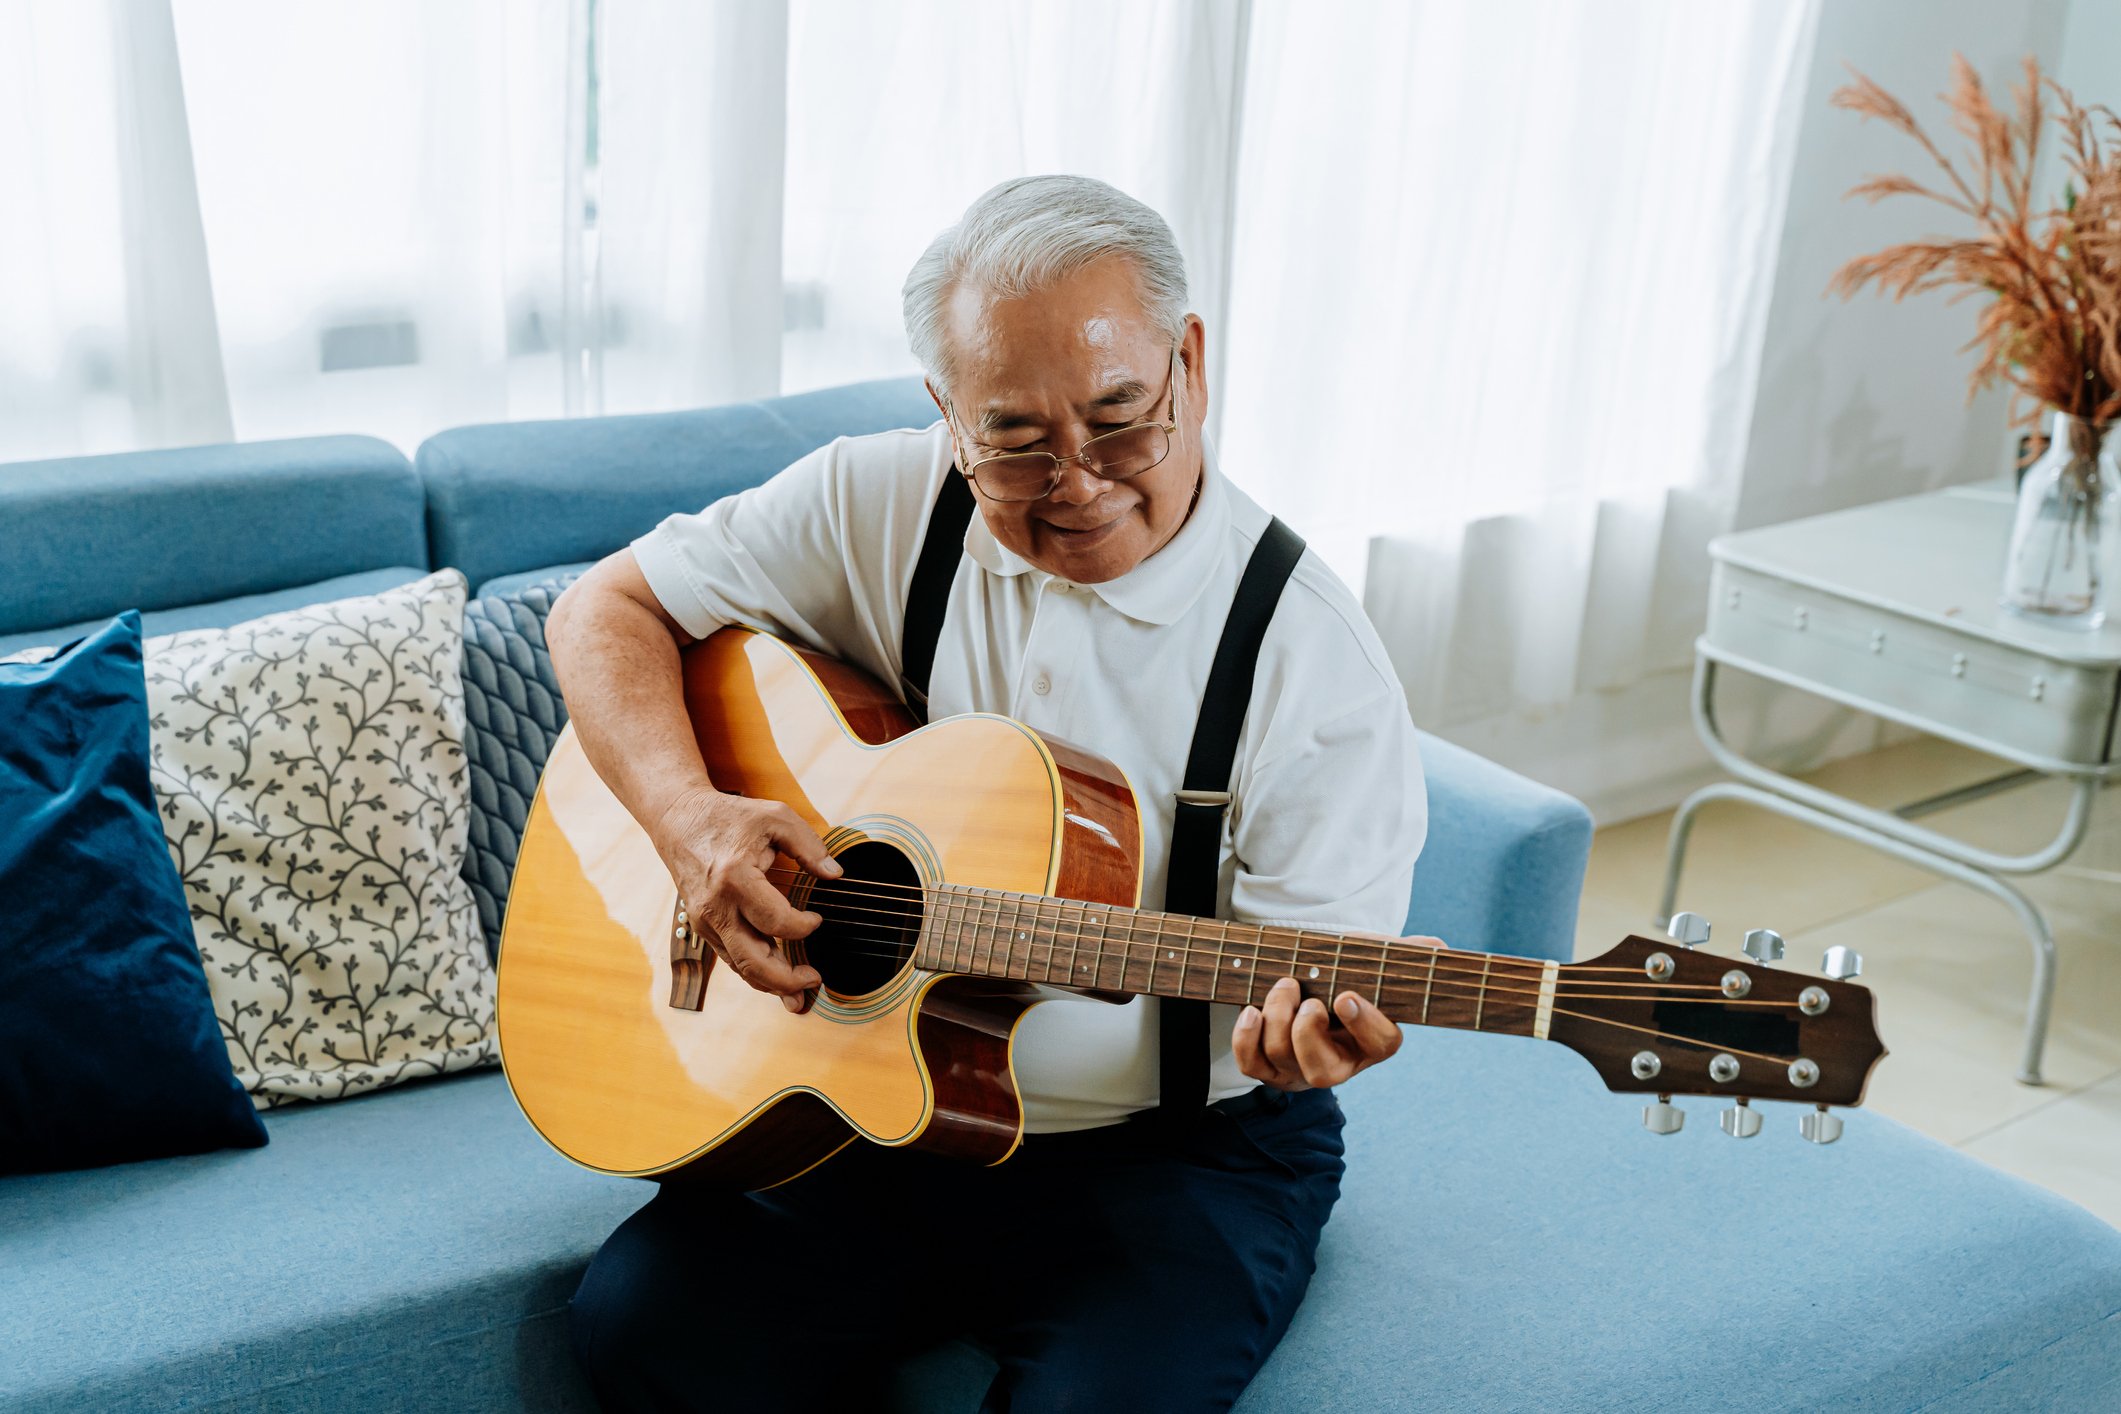 IV. Benefits of Music Therapy for Alzheimer's Patients